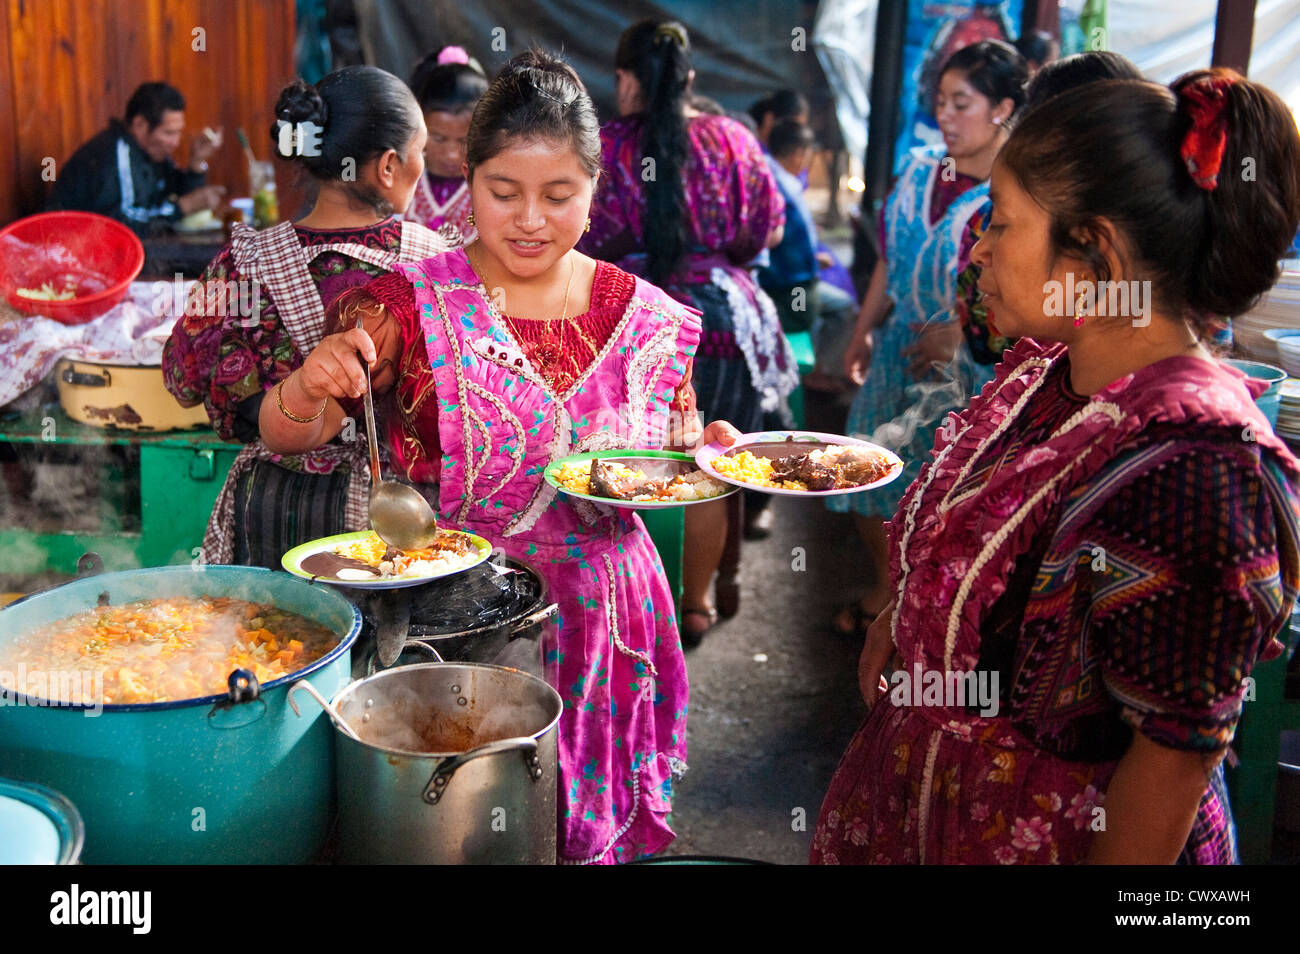 Mayan women girls serving meal at food stand in local market, Chichicastenango, Guatemala. Stock Photo